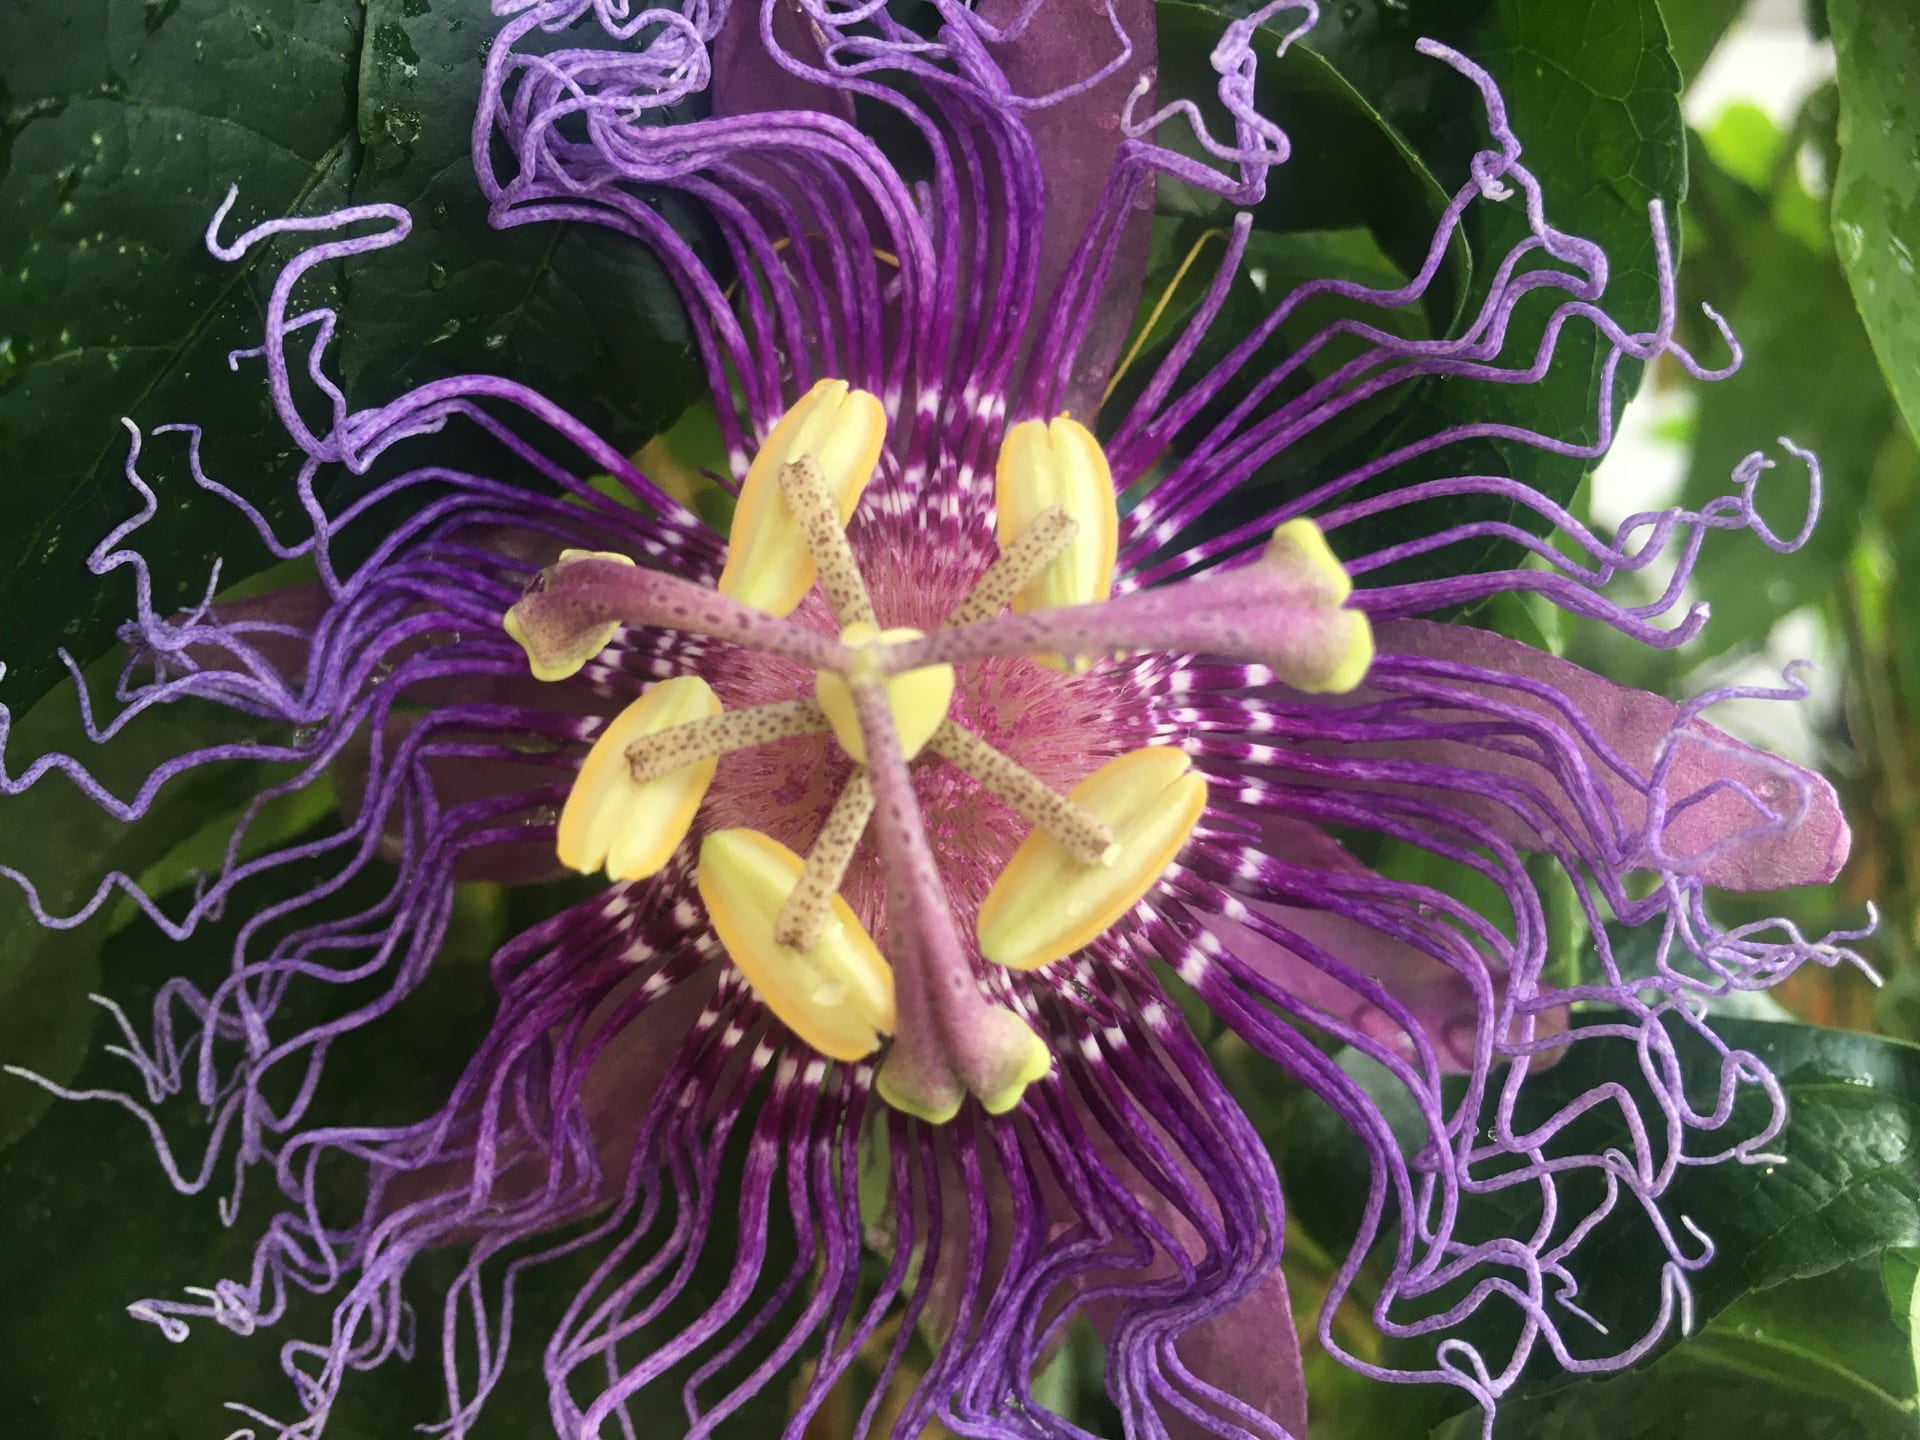 The blooms of passionflowers, Passiflora spp., develop into tangy and sour fruits.